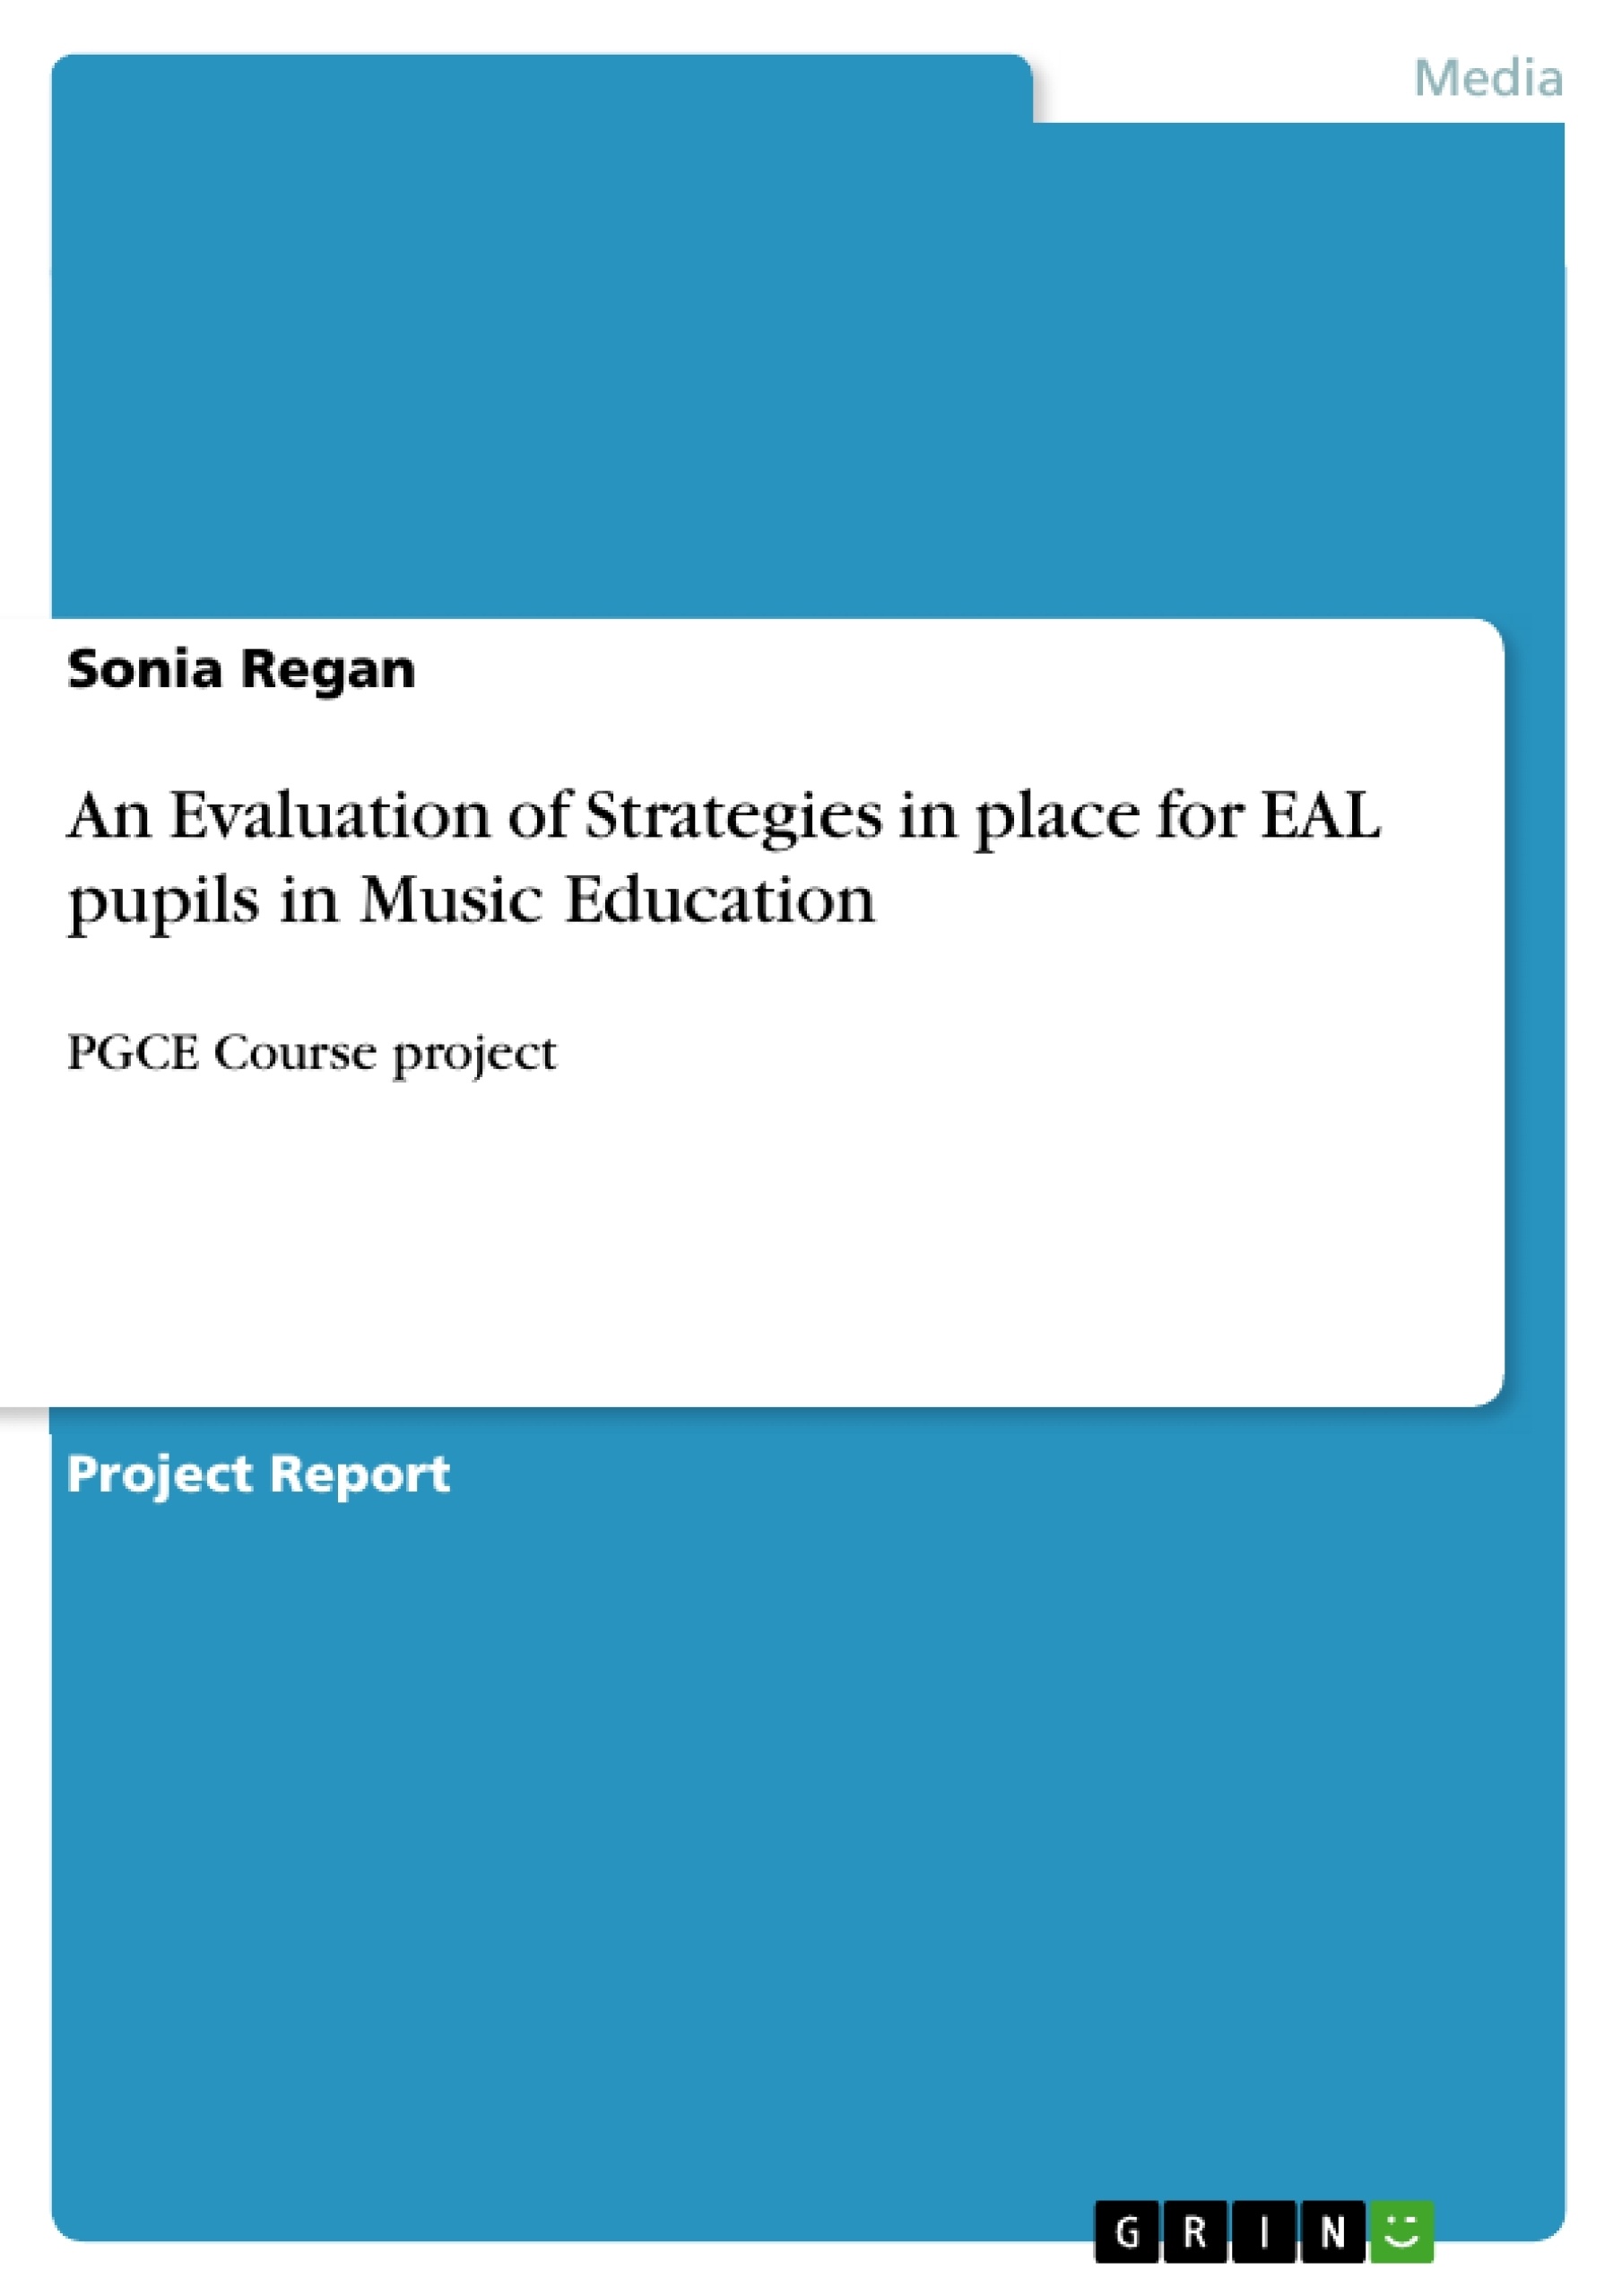 Titre: An Evaluation of Strategies in place for EAL pupils in Music Education